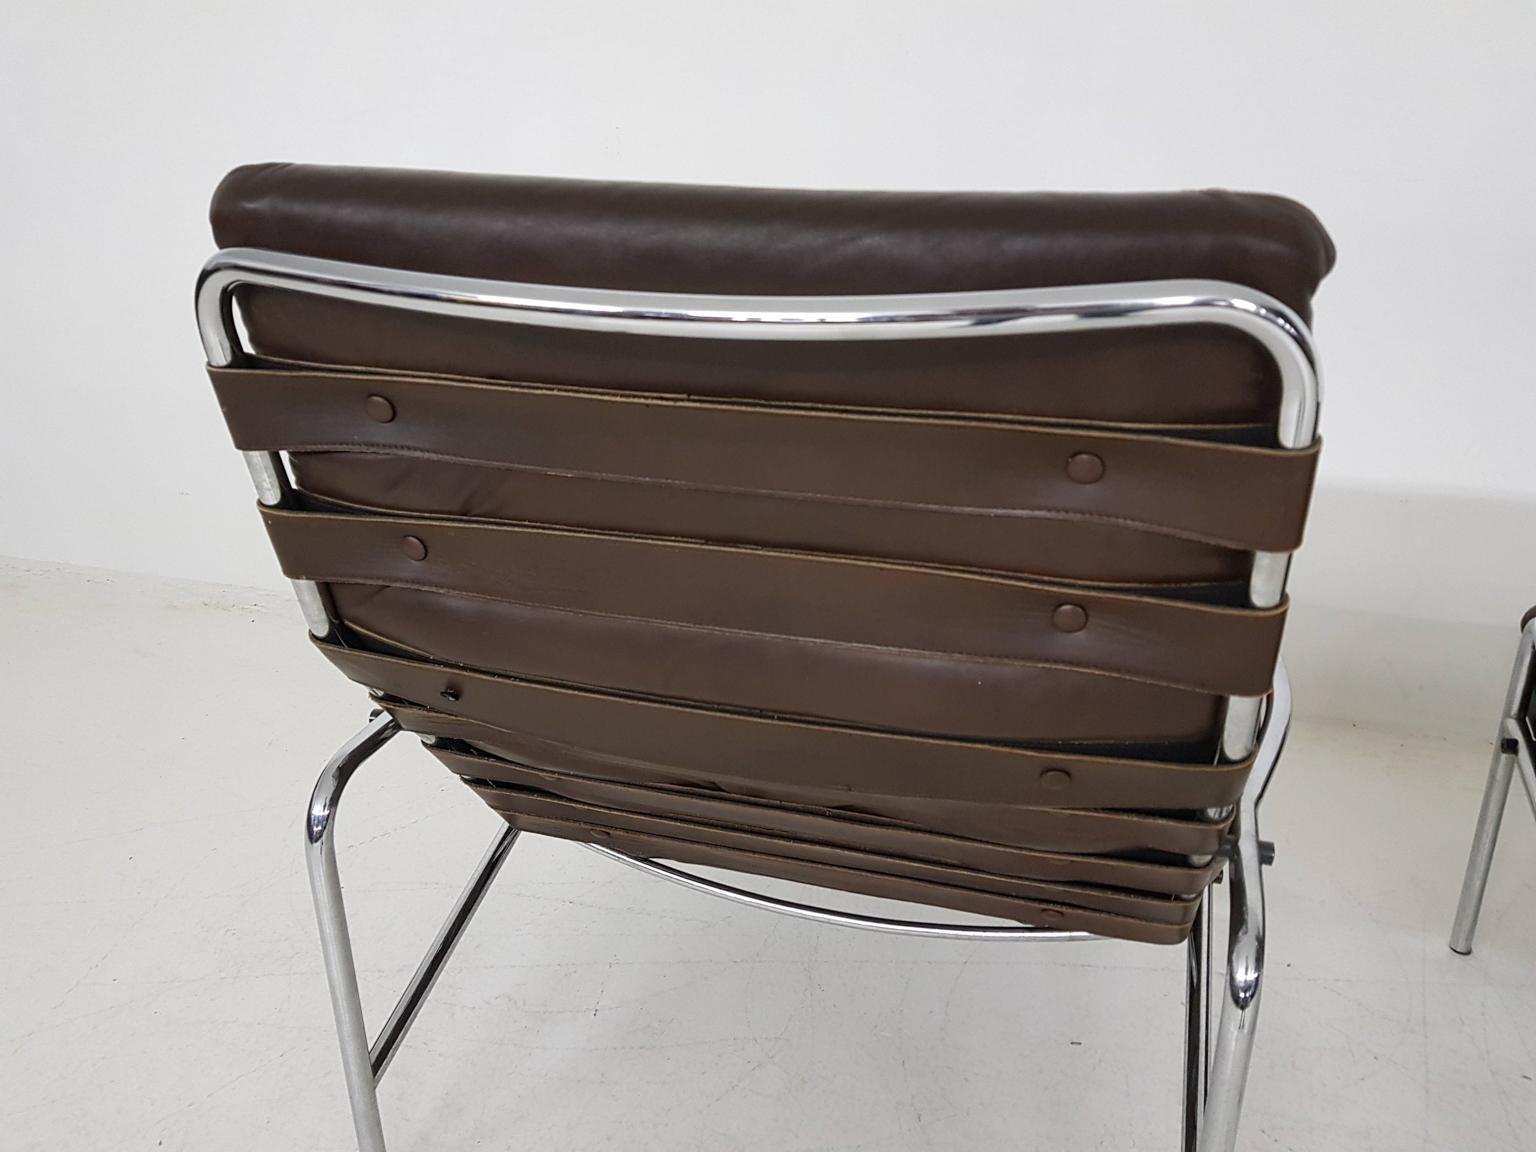 1x Nagoya Brown Leather Lounge Chair by Martin Visser for ’t Spectrum, Dutch '69 1